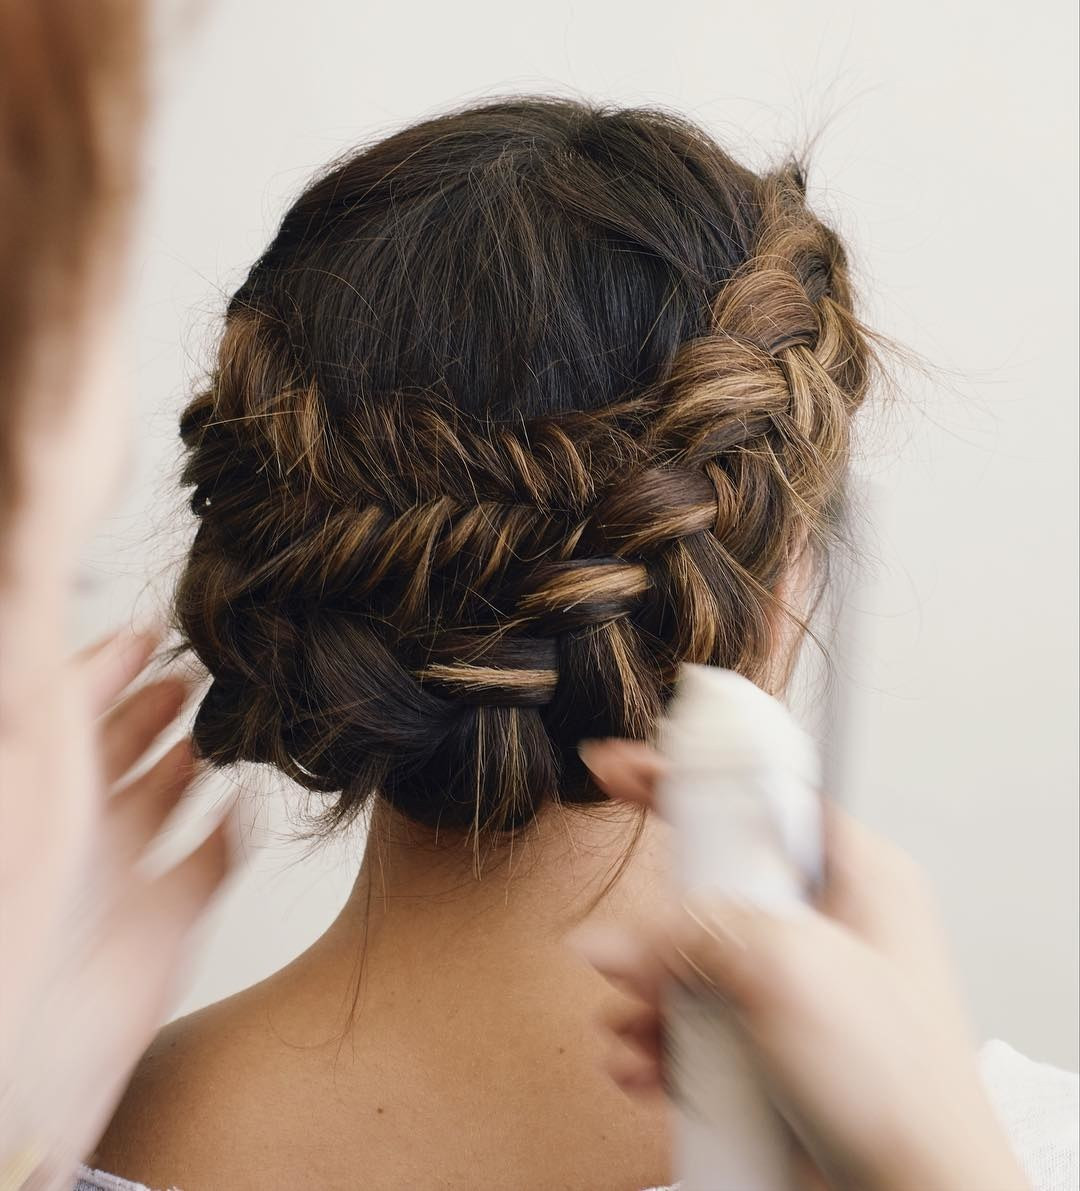 Braided Bridesmaid Hairstyles
 21 Most Outstanding Braided Wedding Hairstyles Haircuts